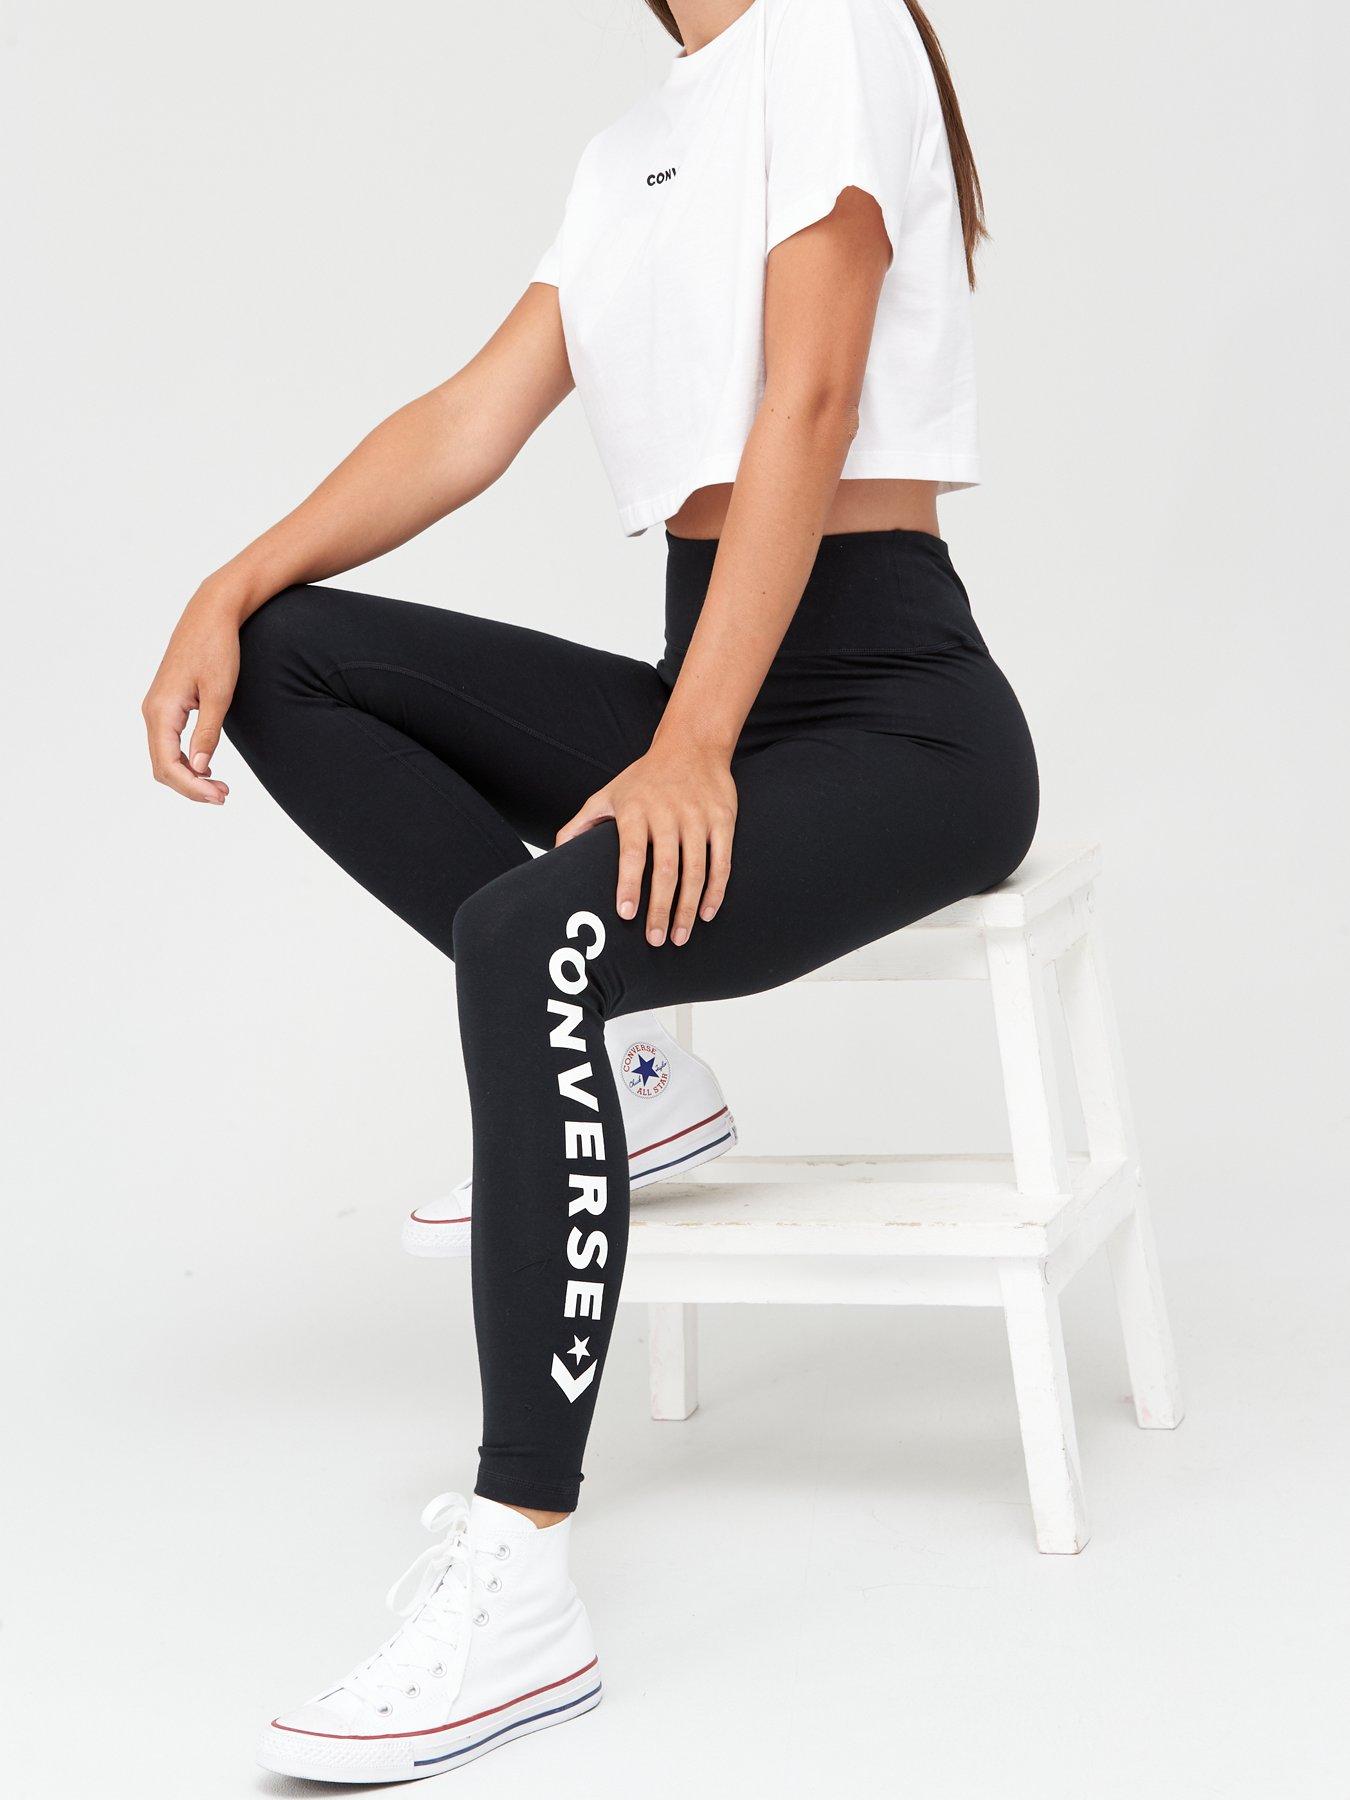 Office London - Style your leggings with the high top sole classics.  Converse Everyday Logo Leggings - R699 (3067738) Available sizes: XS & M -  XL  Converse Unisex Run Star Hike